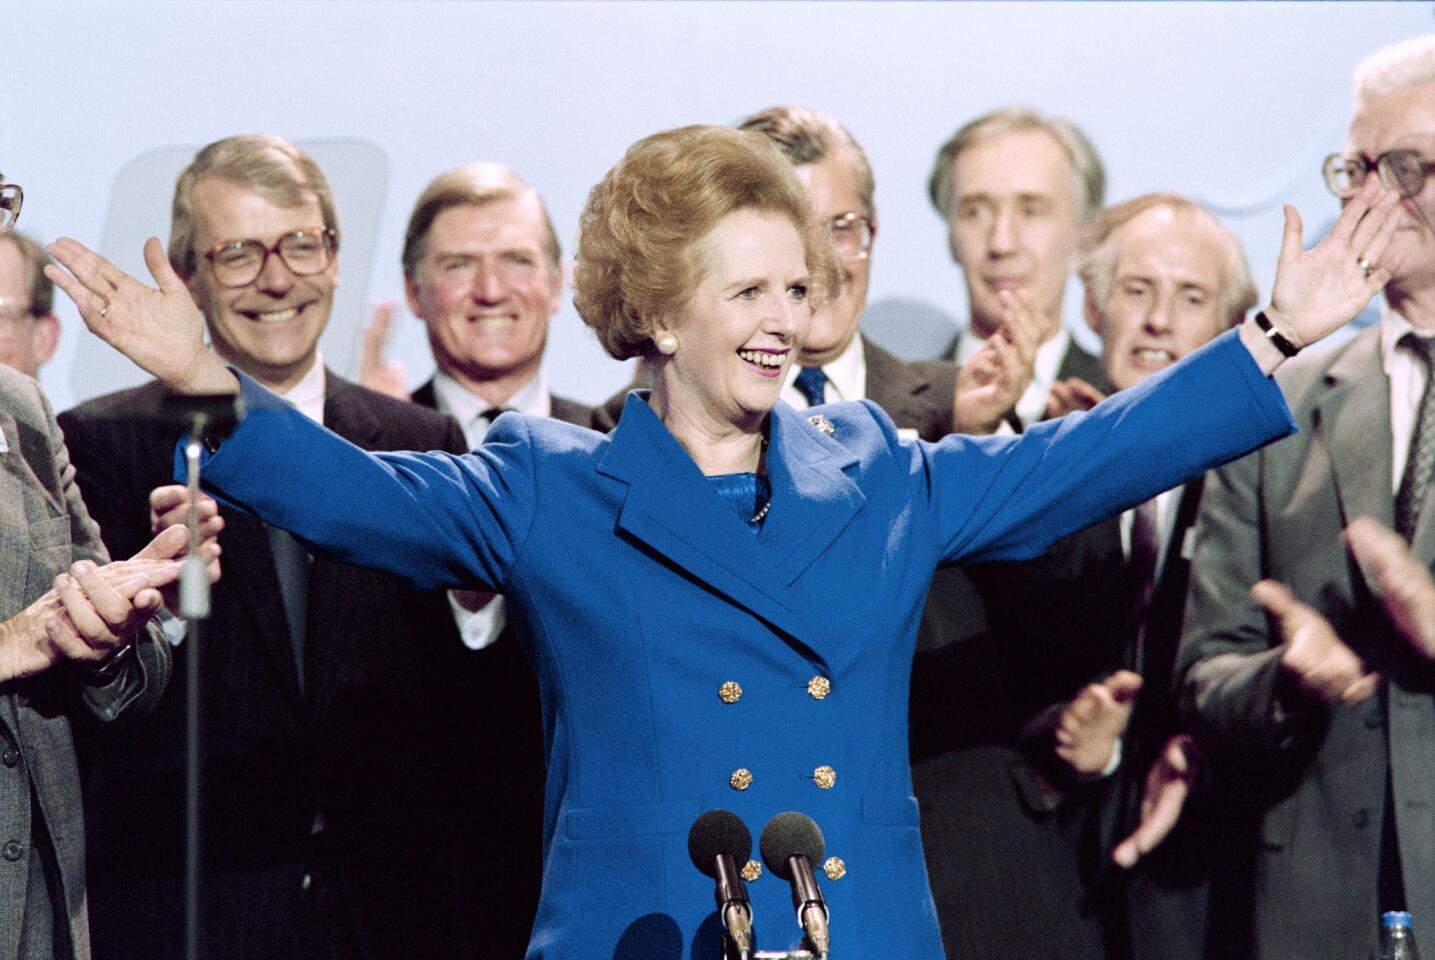 Margaret Thatcher, the "Iron Lady" of British politics, was the first woman to become prime minister of Britain and the first to lead a major Western power in modern times. It was a long road. Her critics panned the principles known as Thatcherism -- that personal responsibility and hard work would lead to national prosperity, and that free-market democracies should stand firm against aggression -- but gave her grudging respect in the end. Said Thatcher: "You don't follow the crowd, you make up your own mind." Thatcher is seen above in 1989.